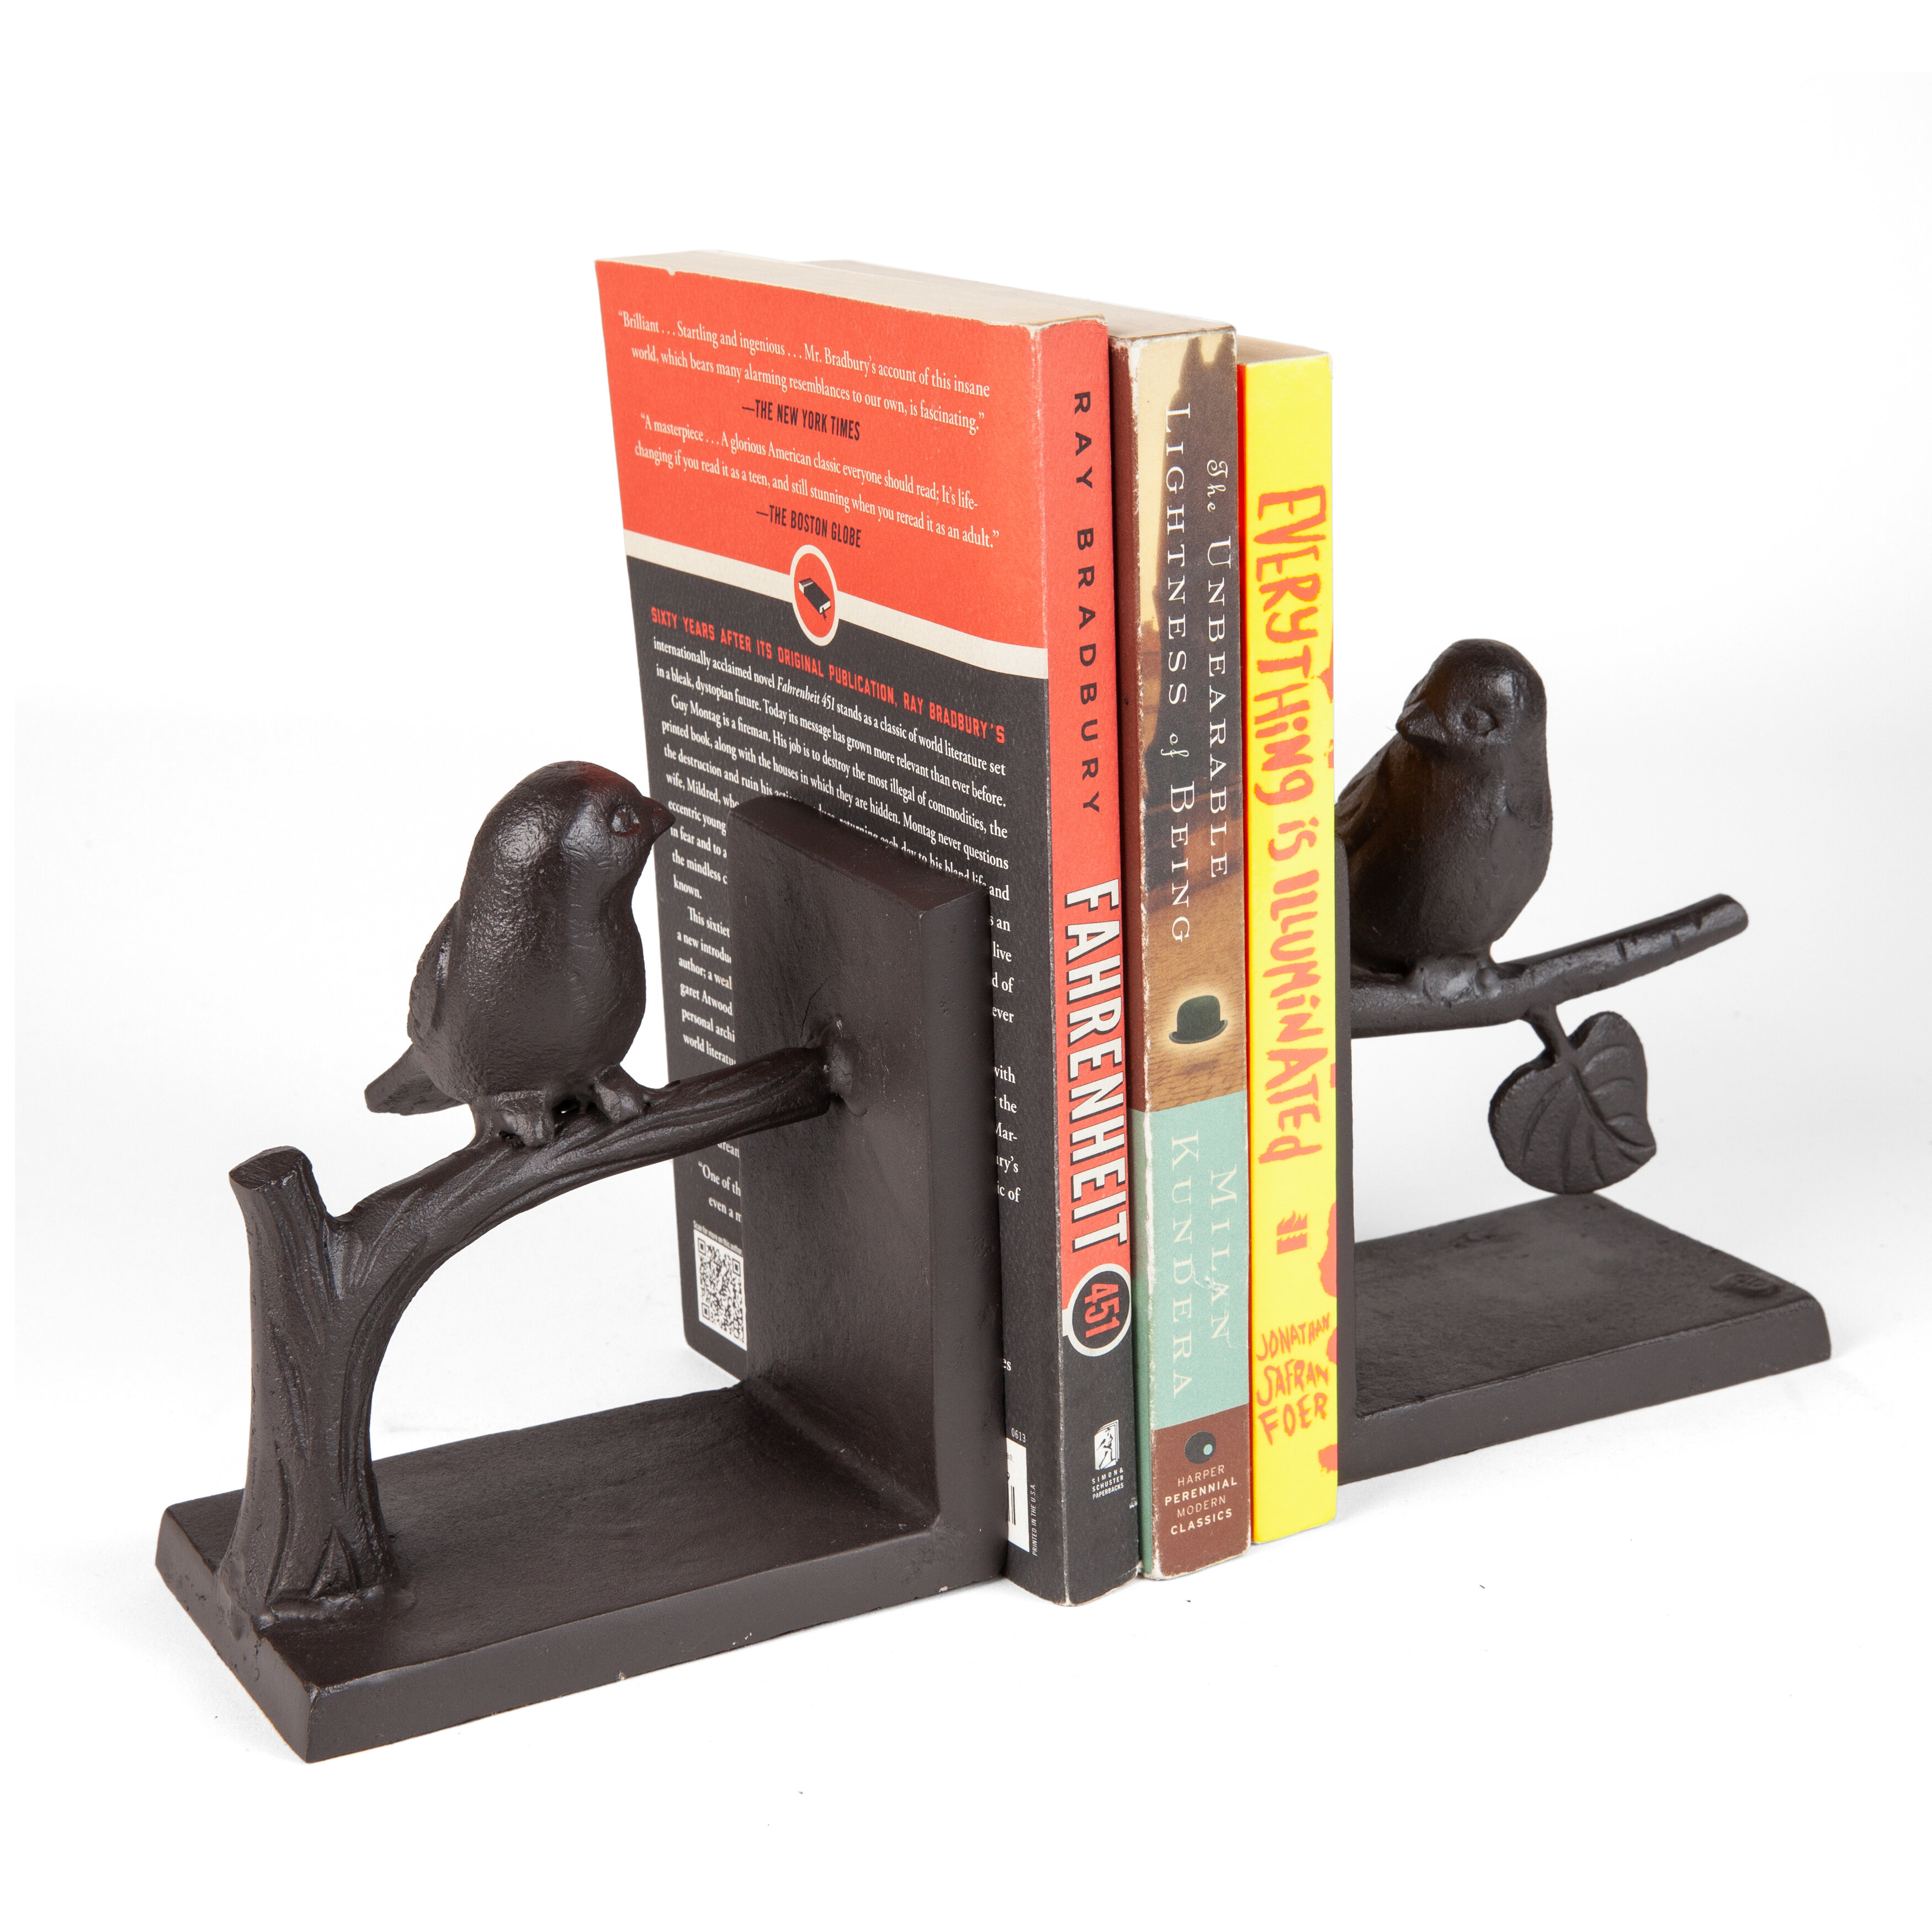 Rabbit Bookends Book Stand Holder Resin Figurines for Home Cabinet